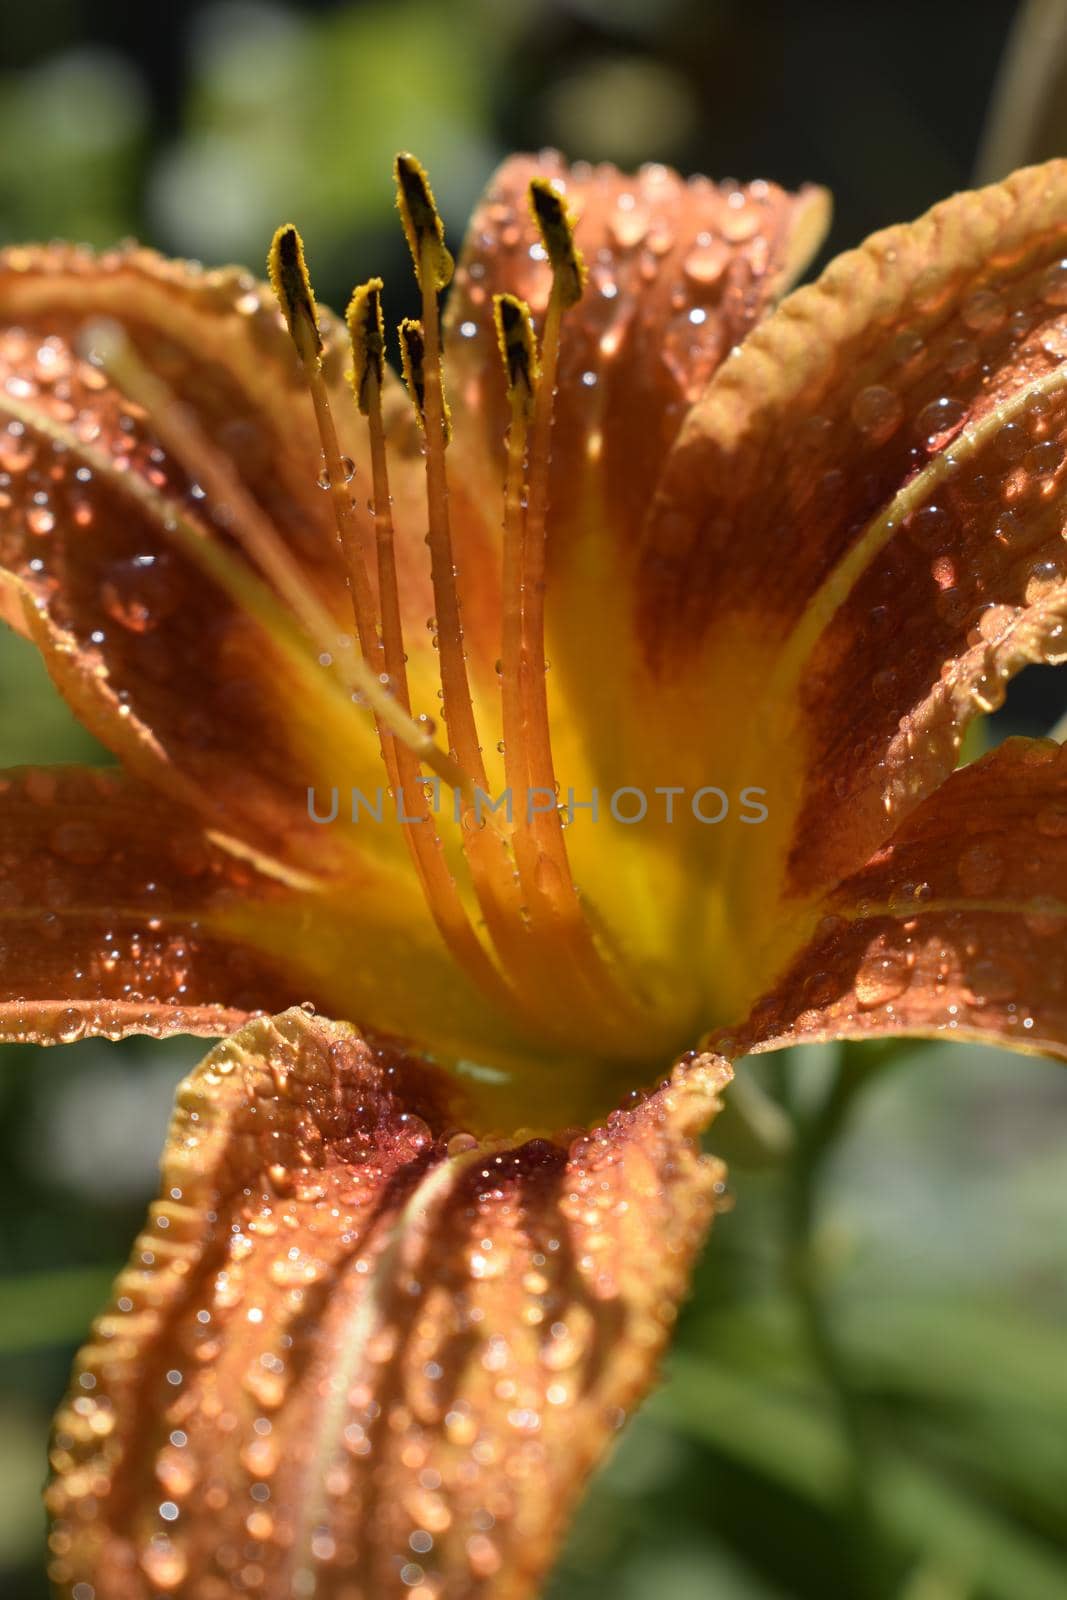 Orange lily (Lilium) flowers with drops of dew. Close-up of beautiful Lilium bulbiferum with water drops